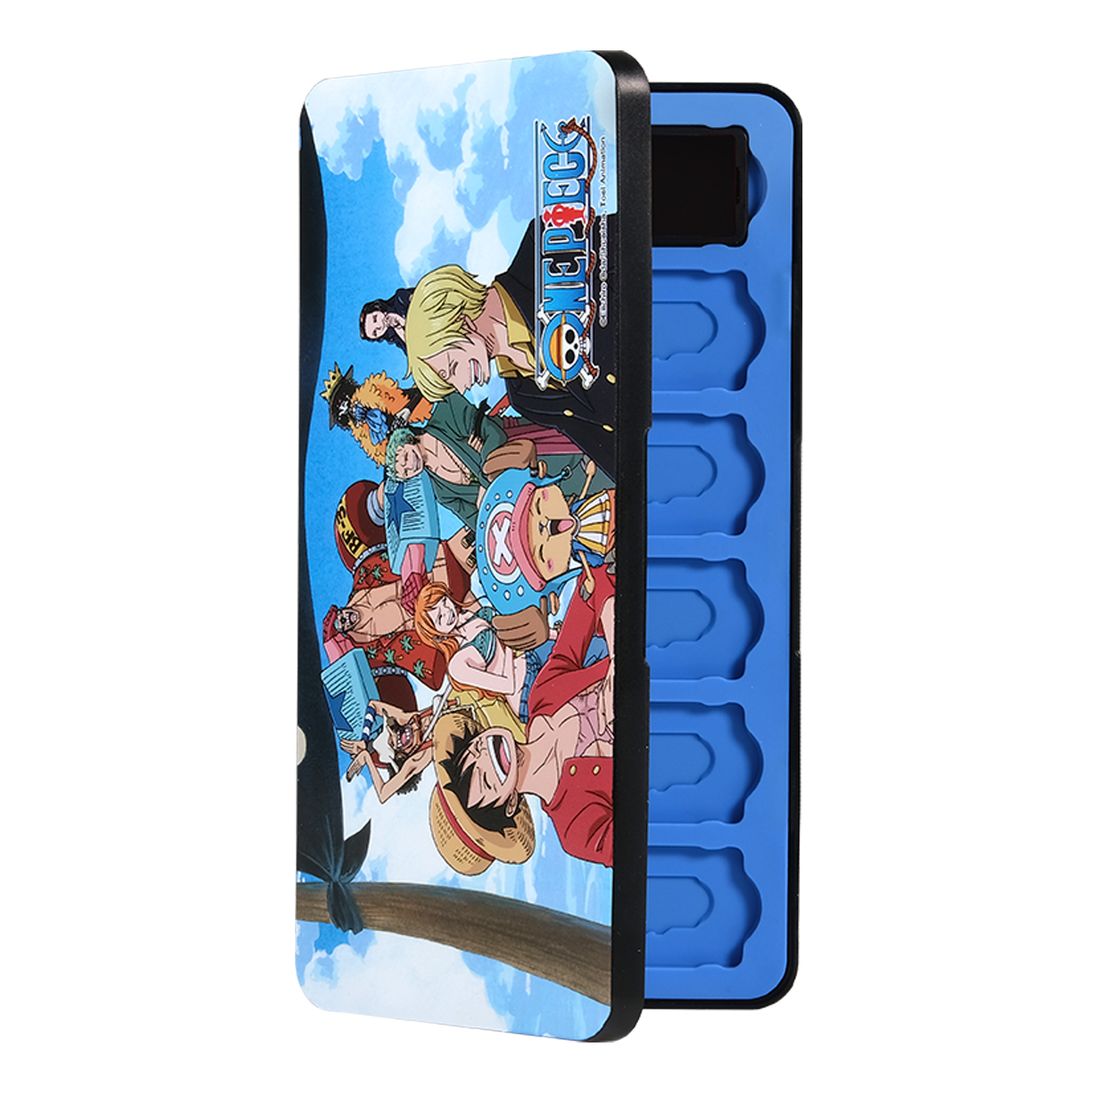 FR-TEC One Piece 24-Game Box for Nintendo Switch